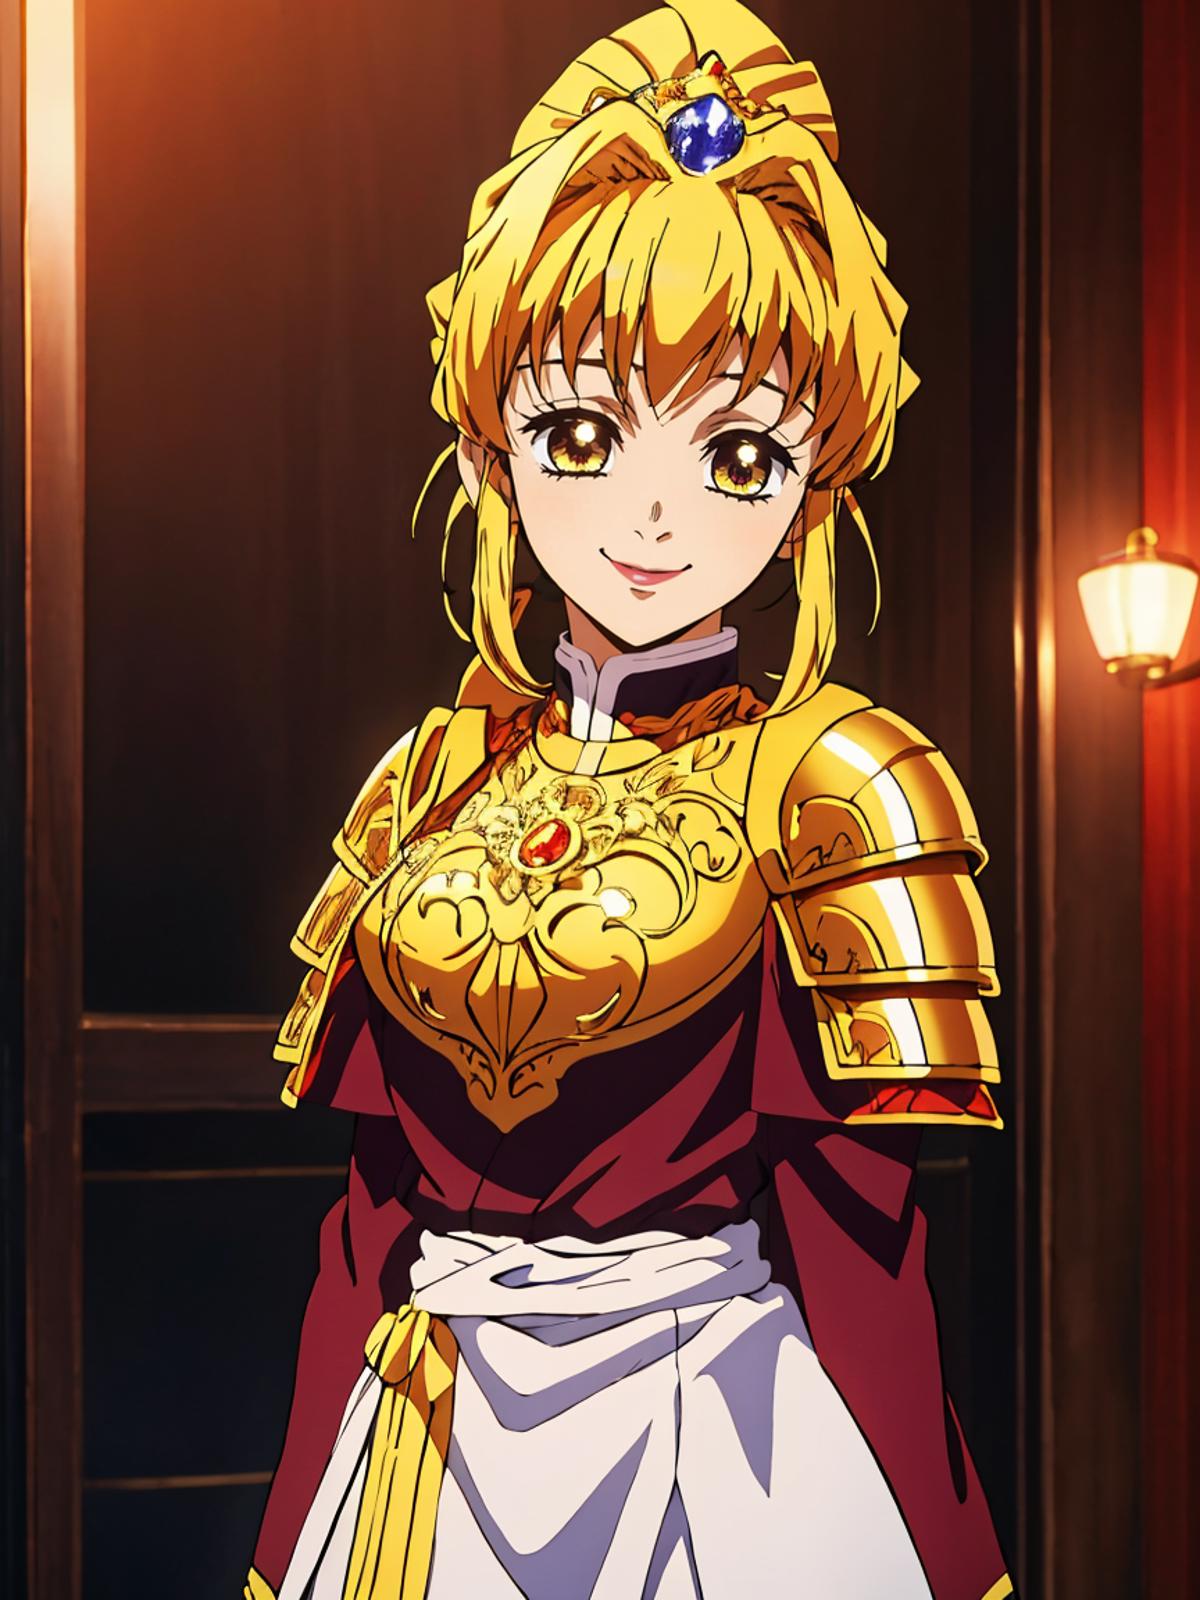 A cartoon girl wearing a gold and red costume with an apron.